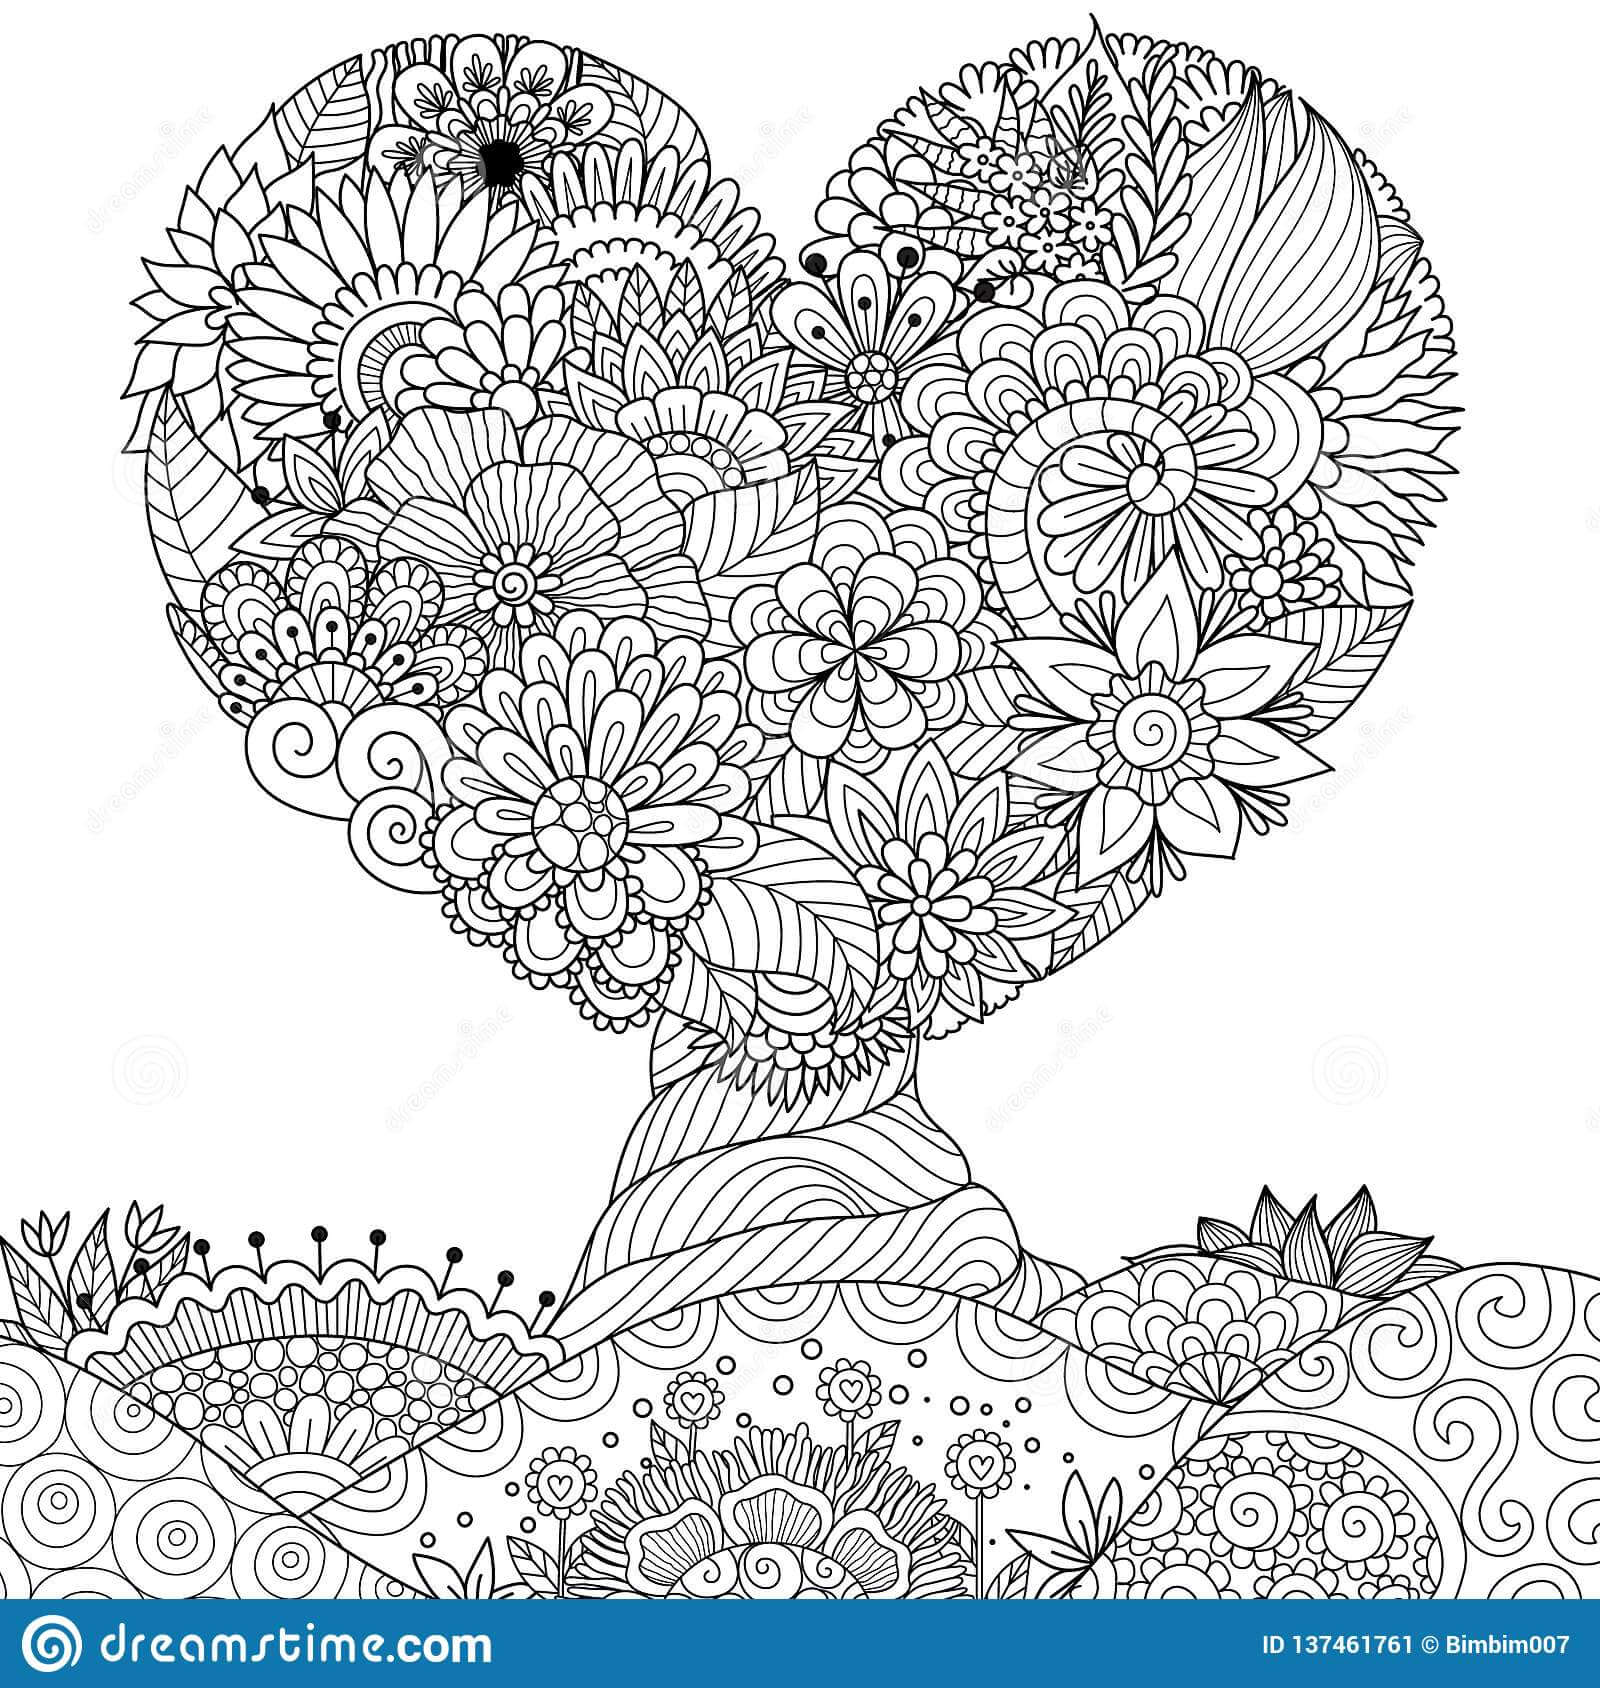 snoopy valentines day coloring pages | valentines day coloring pages supercoloring | easter coloring pages